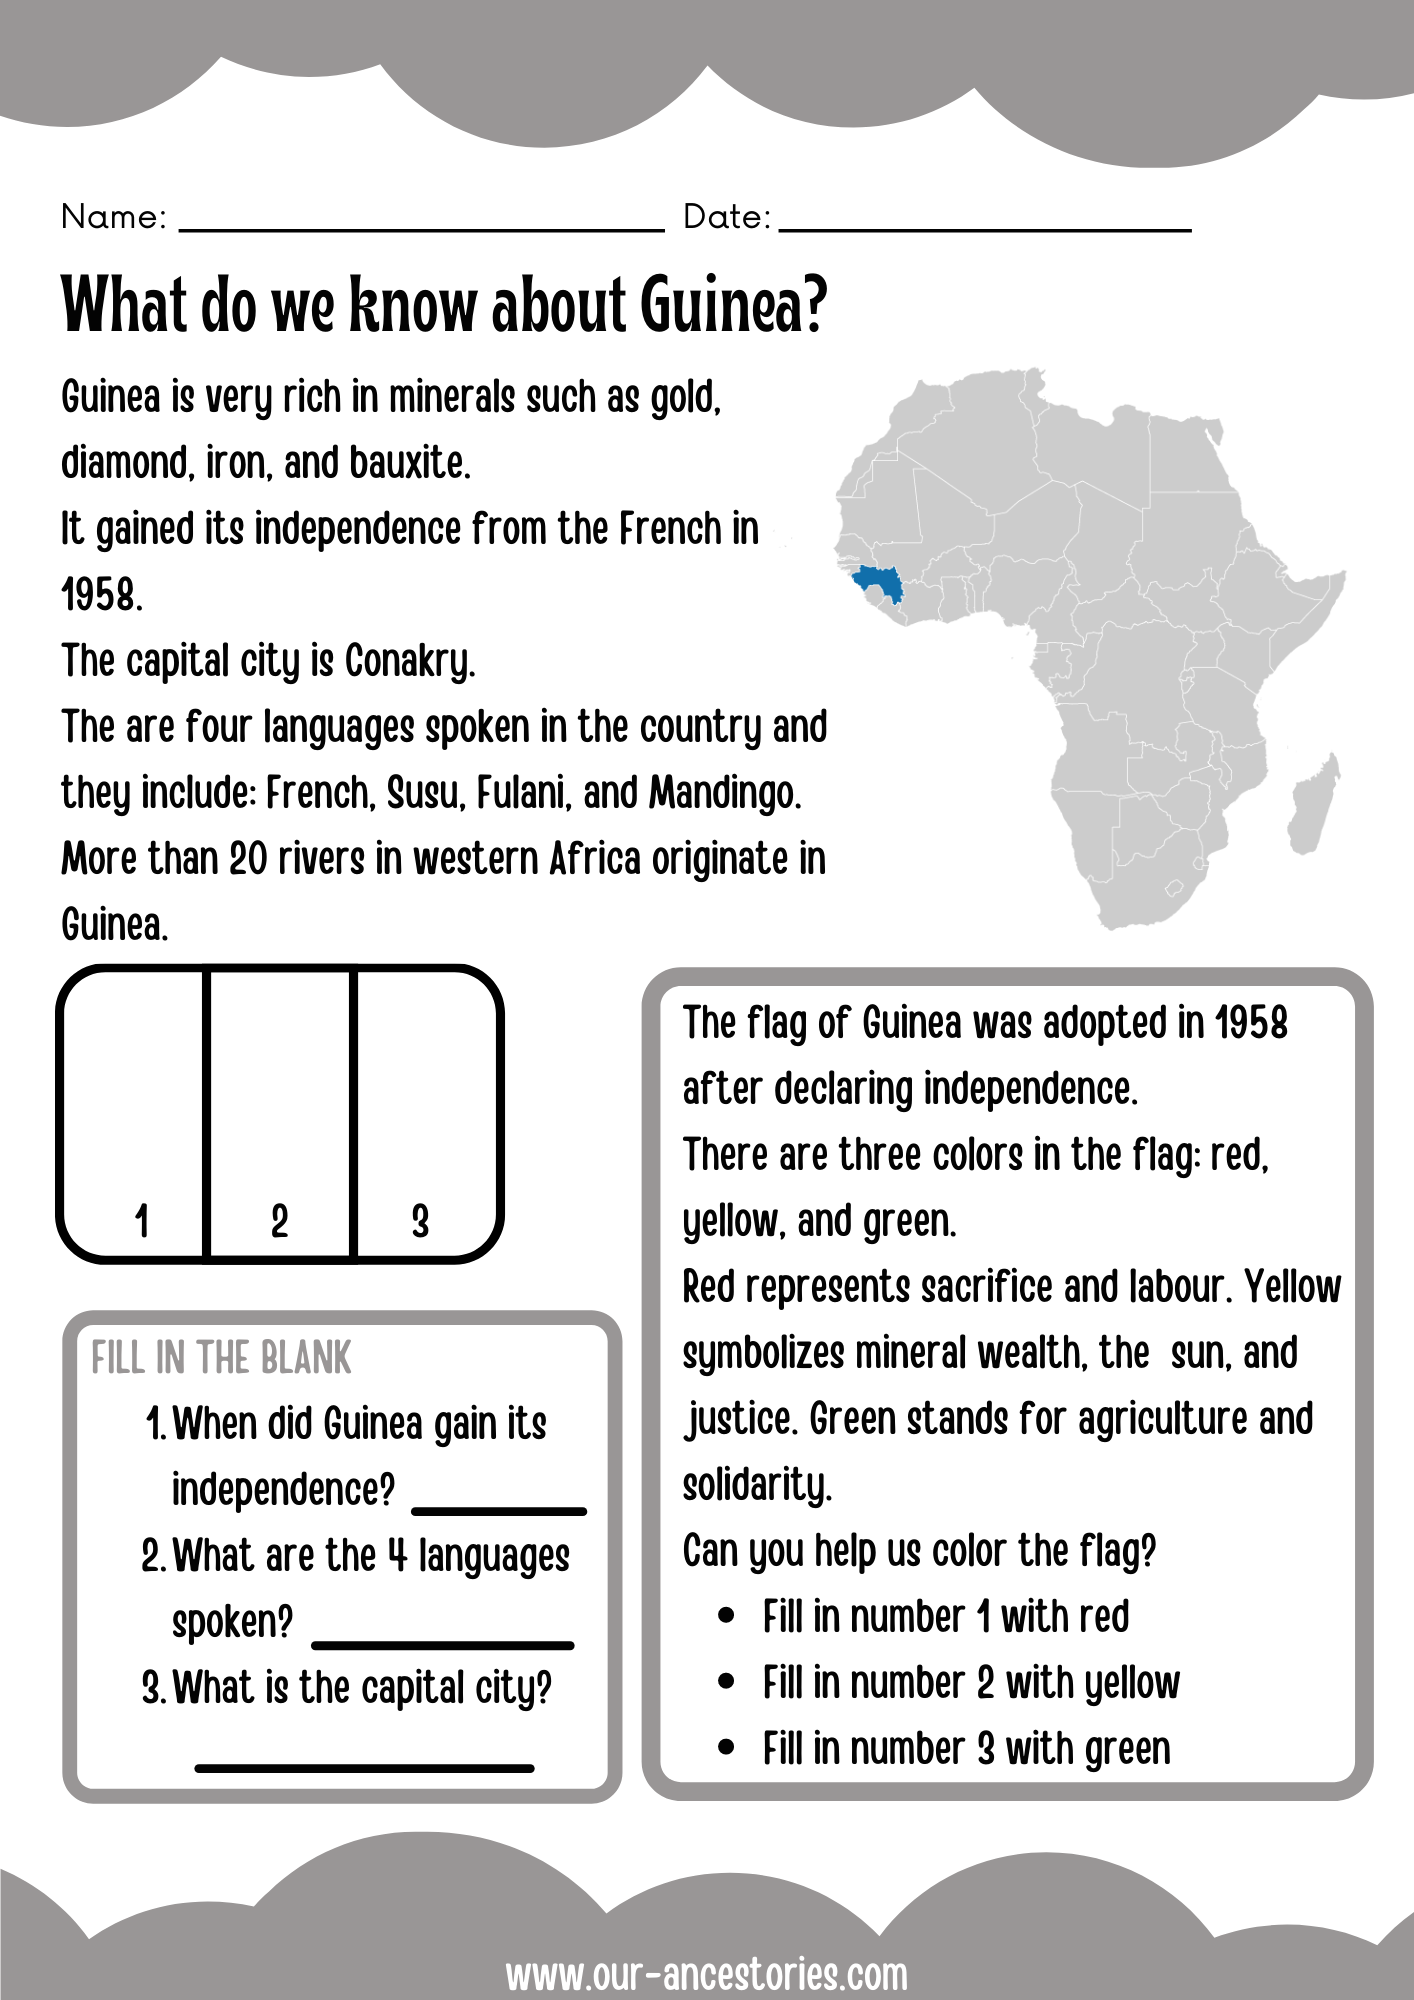 Our Ancestories - Guinea Country Profile - Free Worksheets